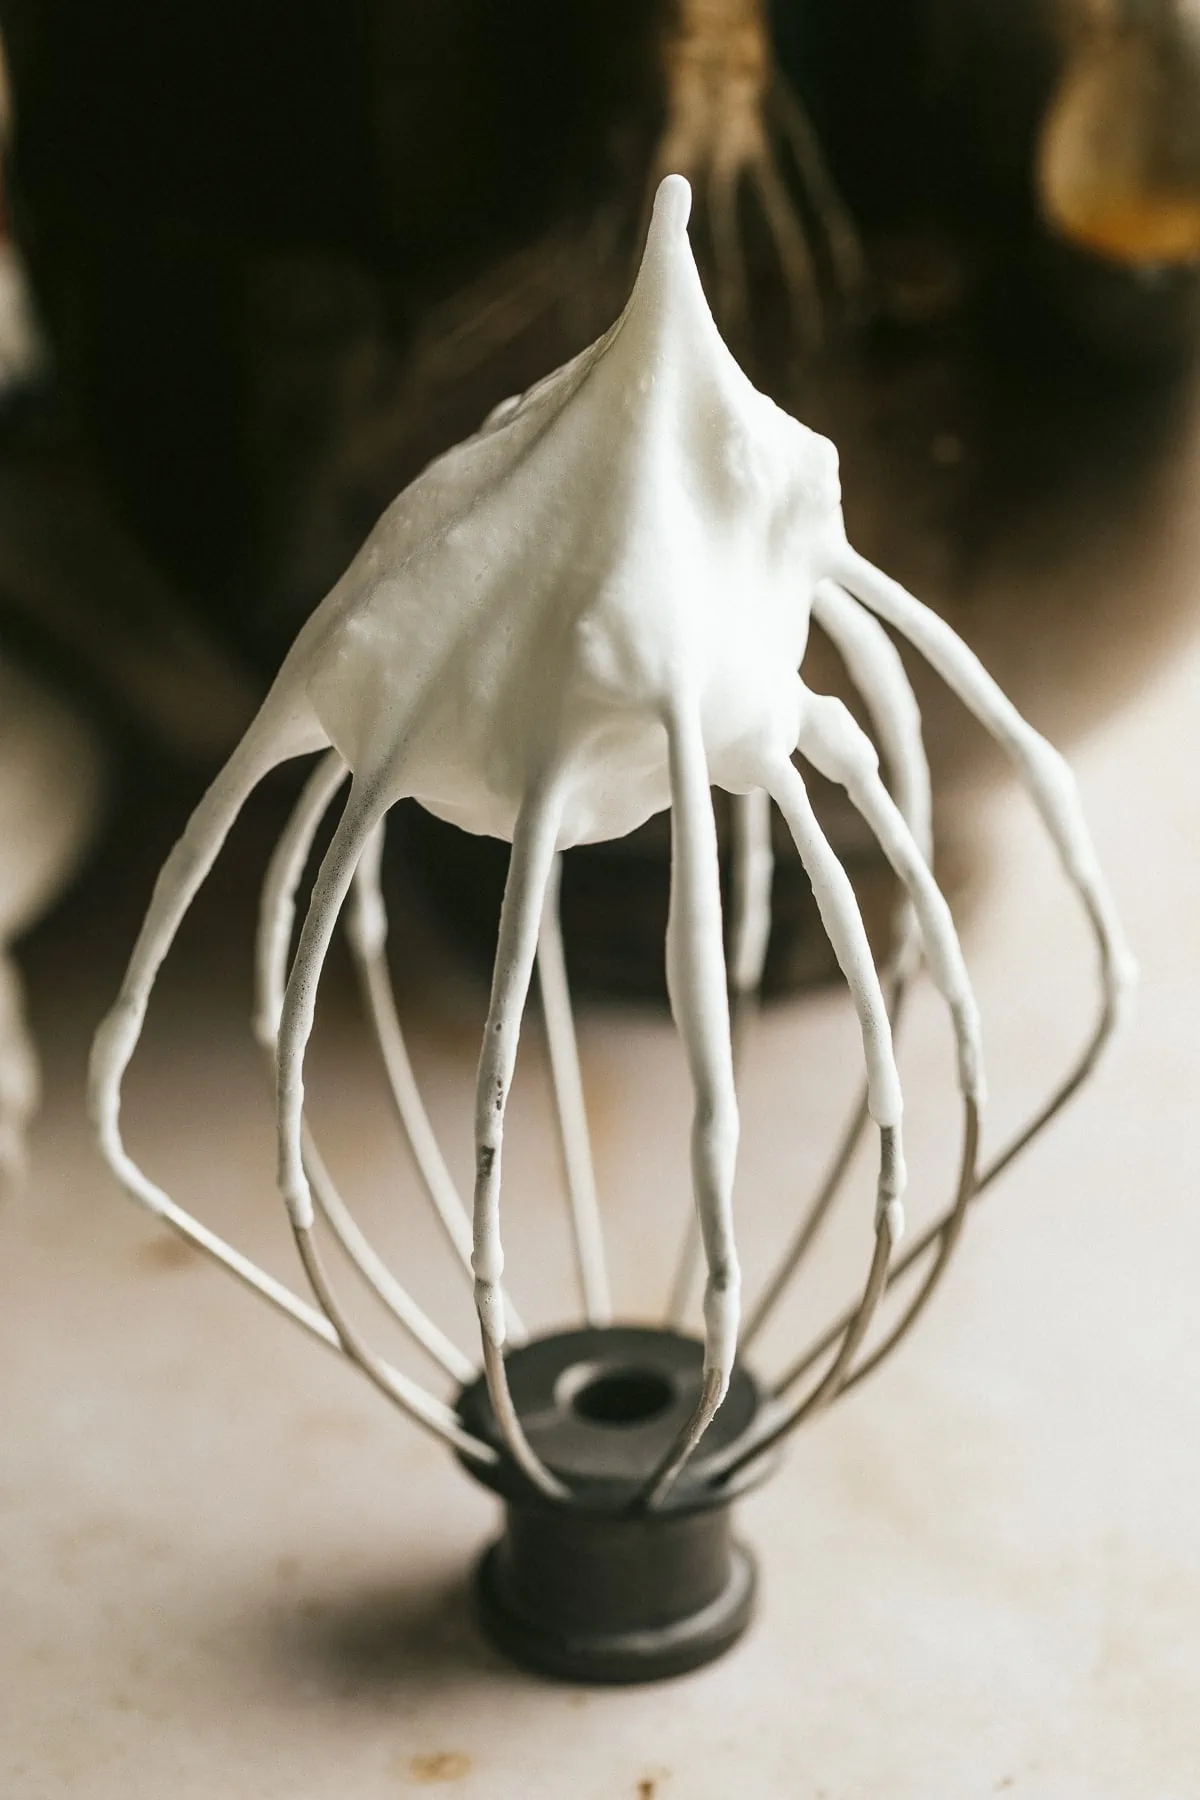 Whipped egg whites on a wire whisk attachment.